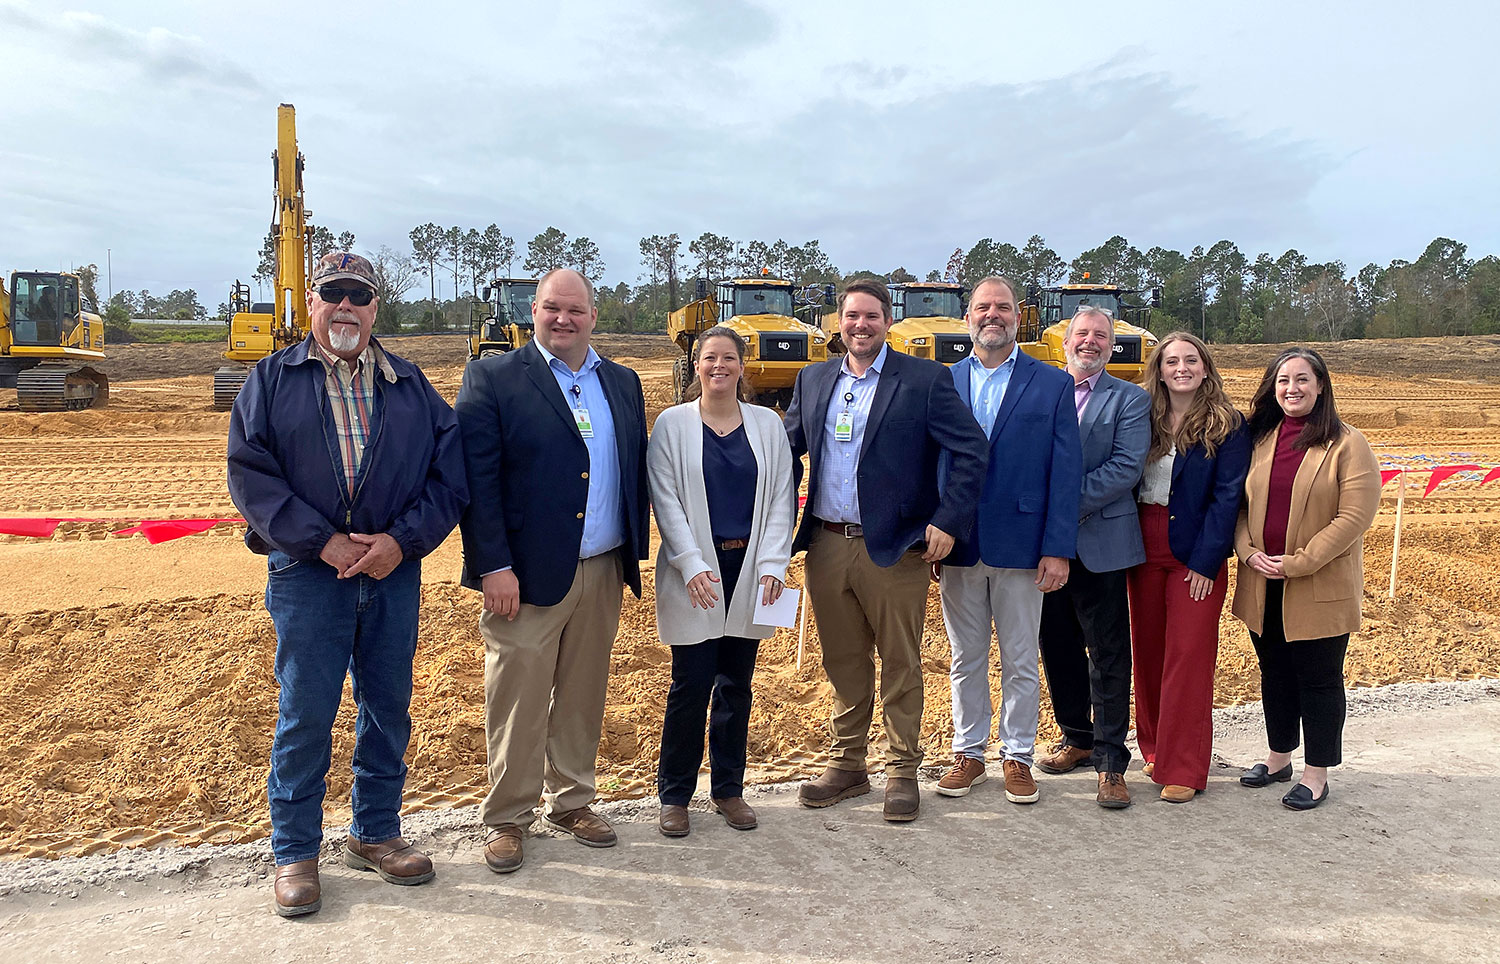 AdventHealth breaks ground for a new hospital in Minneola, Fla.